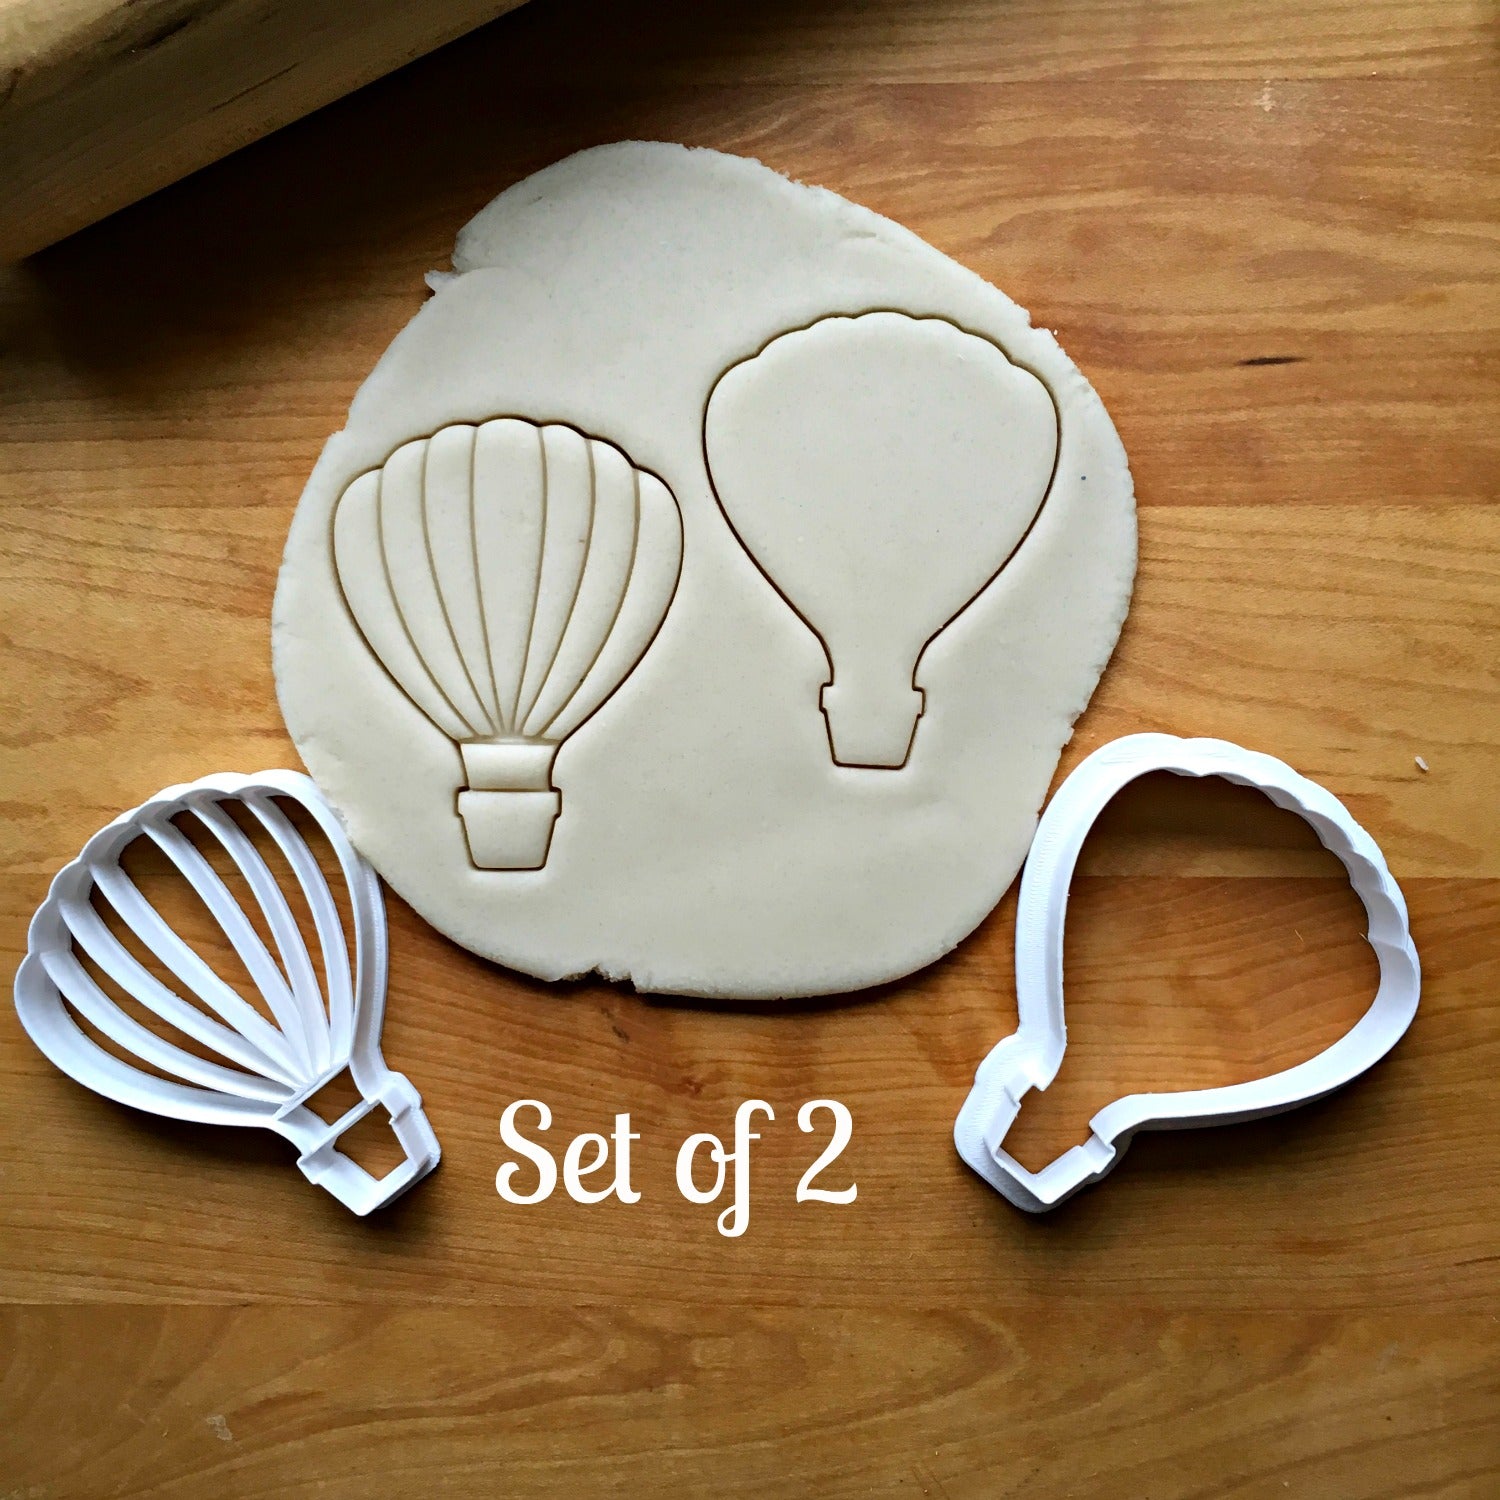 Set of 2 Hot Air Balloon Cookie Cutters/Multi-Size/Dishwasher Safe